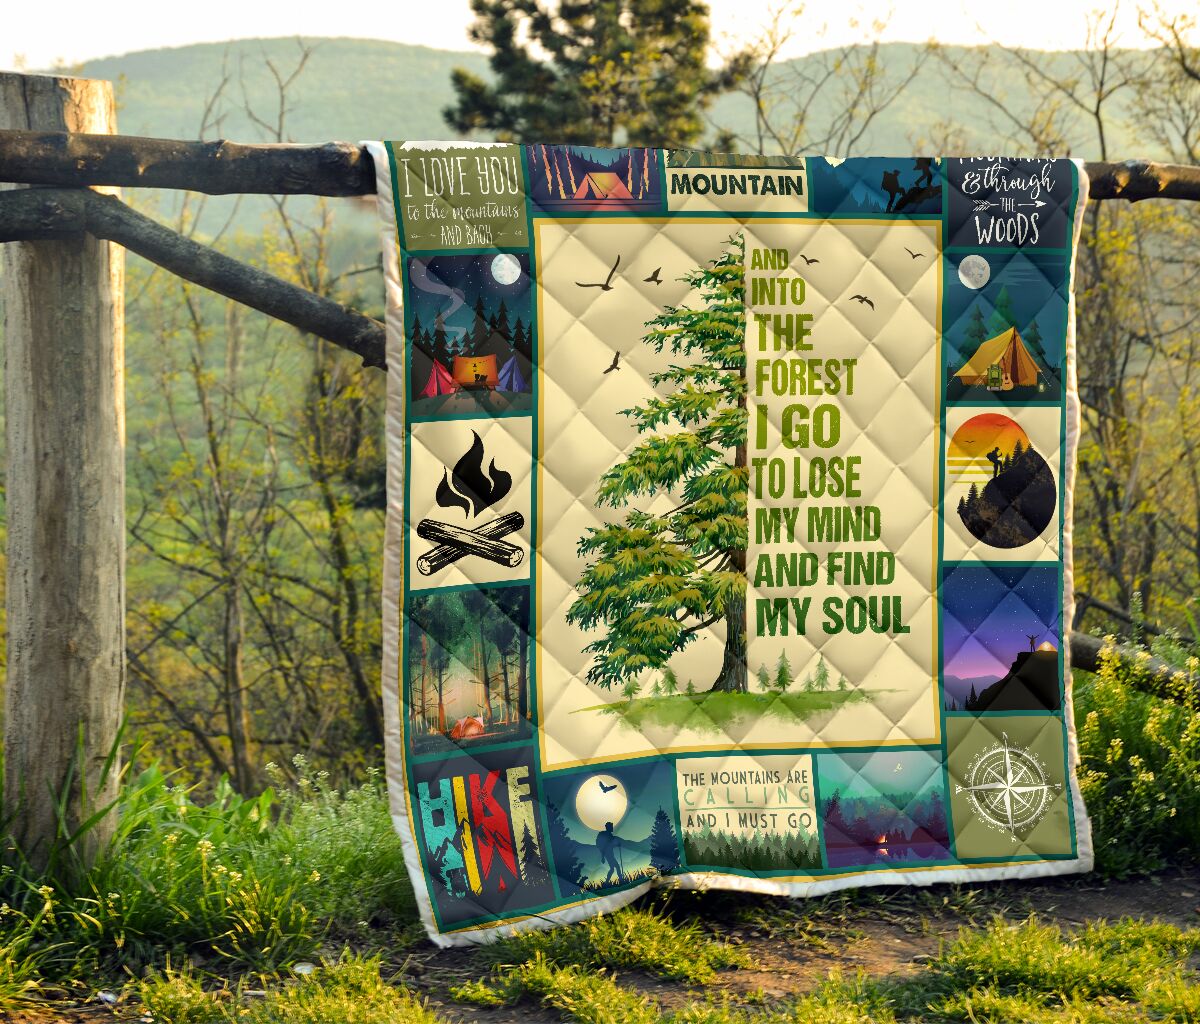 And into the forest i go to lose my mind and find my soul quilt 3